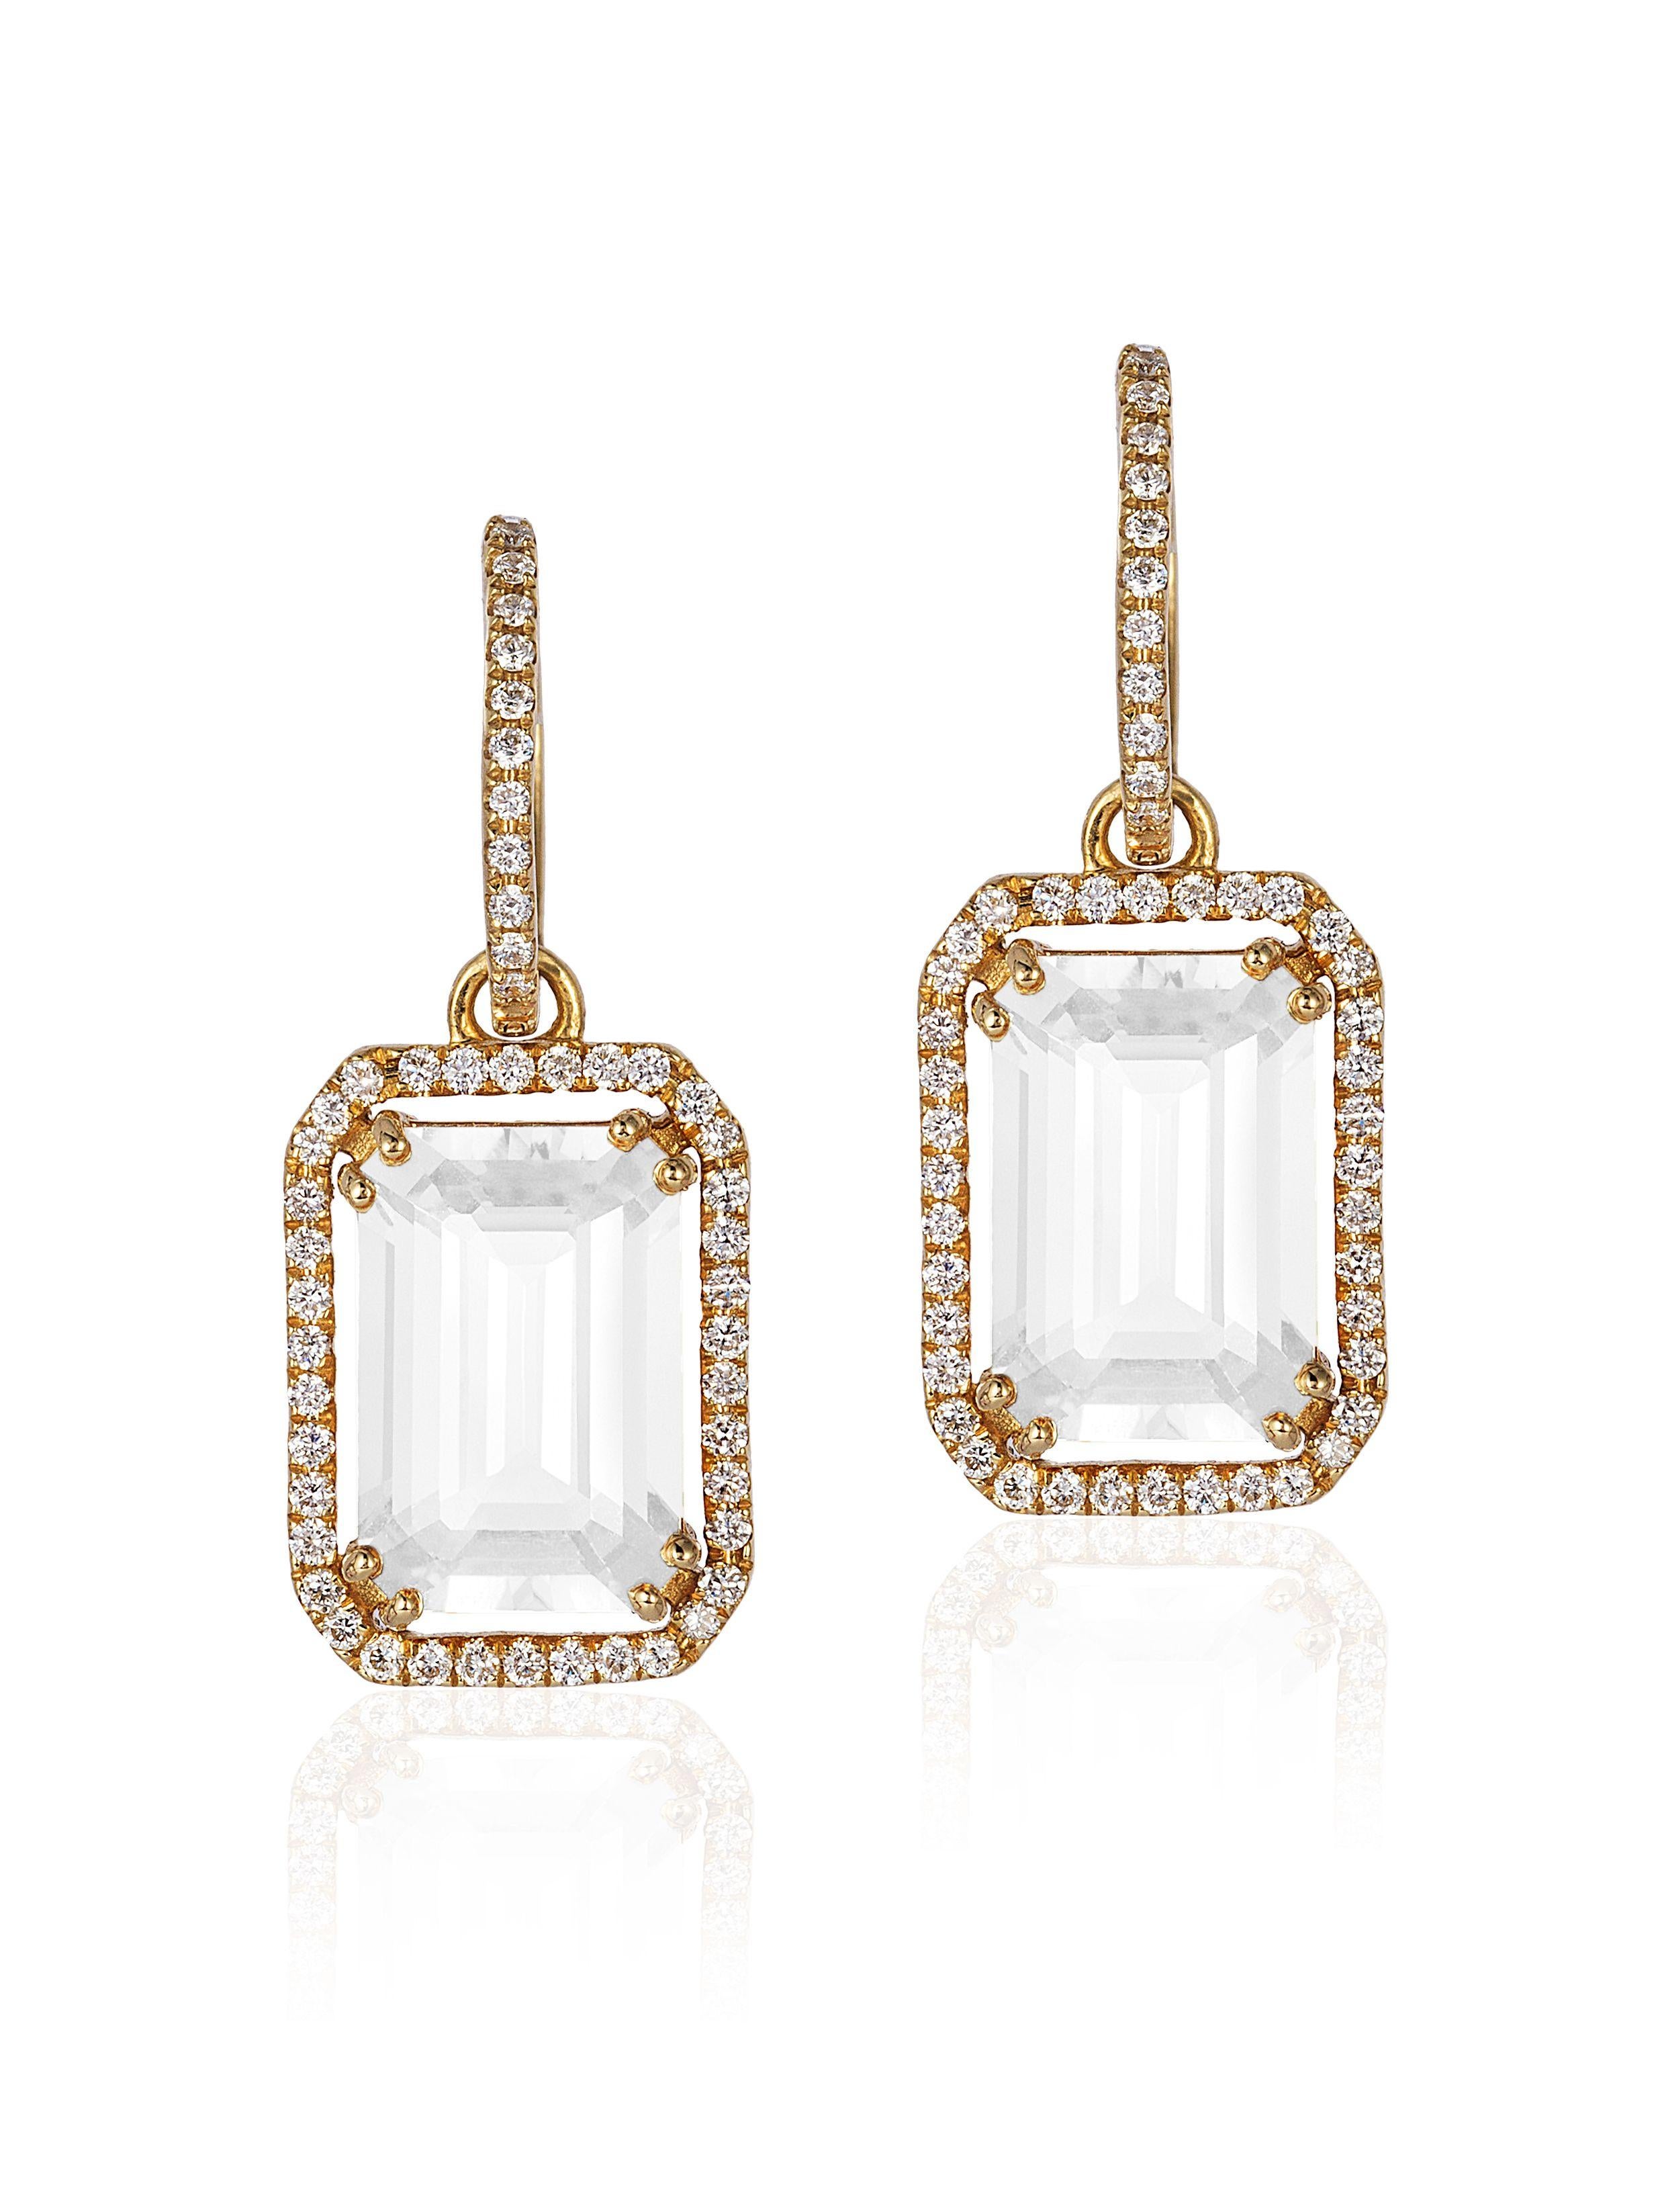 Moon Quartz Emerald Cut Earrings with Diamonds Trim in 18K Yellow Gold, from 'Gossip' Collection
Hoops can be worn separately. Please, allow 5-6 weeks for this items to be delivered.

Stone Size: 12 x 8 mm 

Gemstone Approx. Wt: Moon Quartz- 7.32